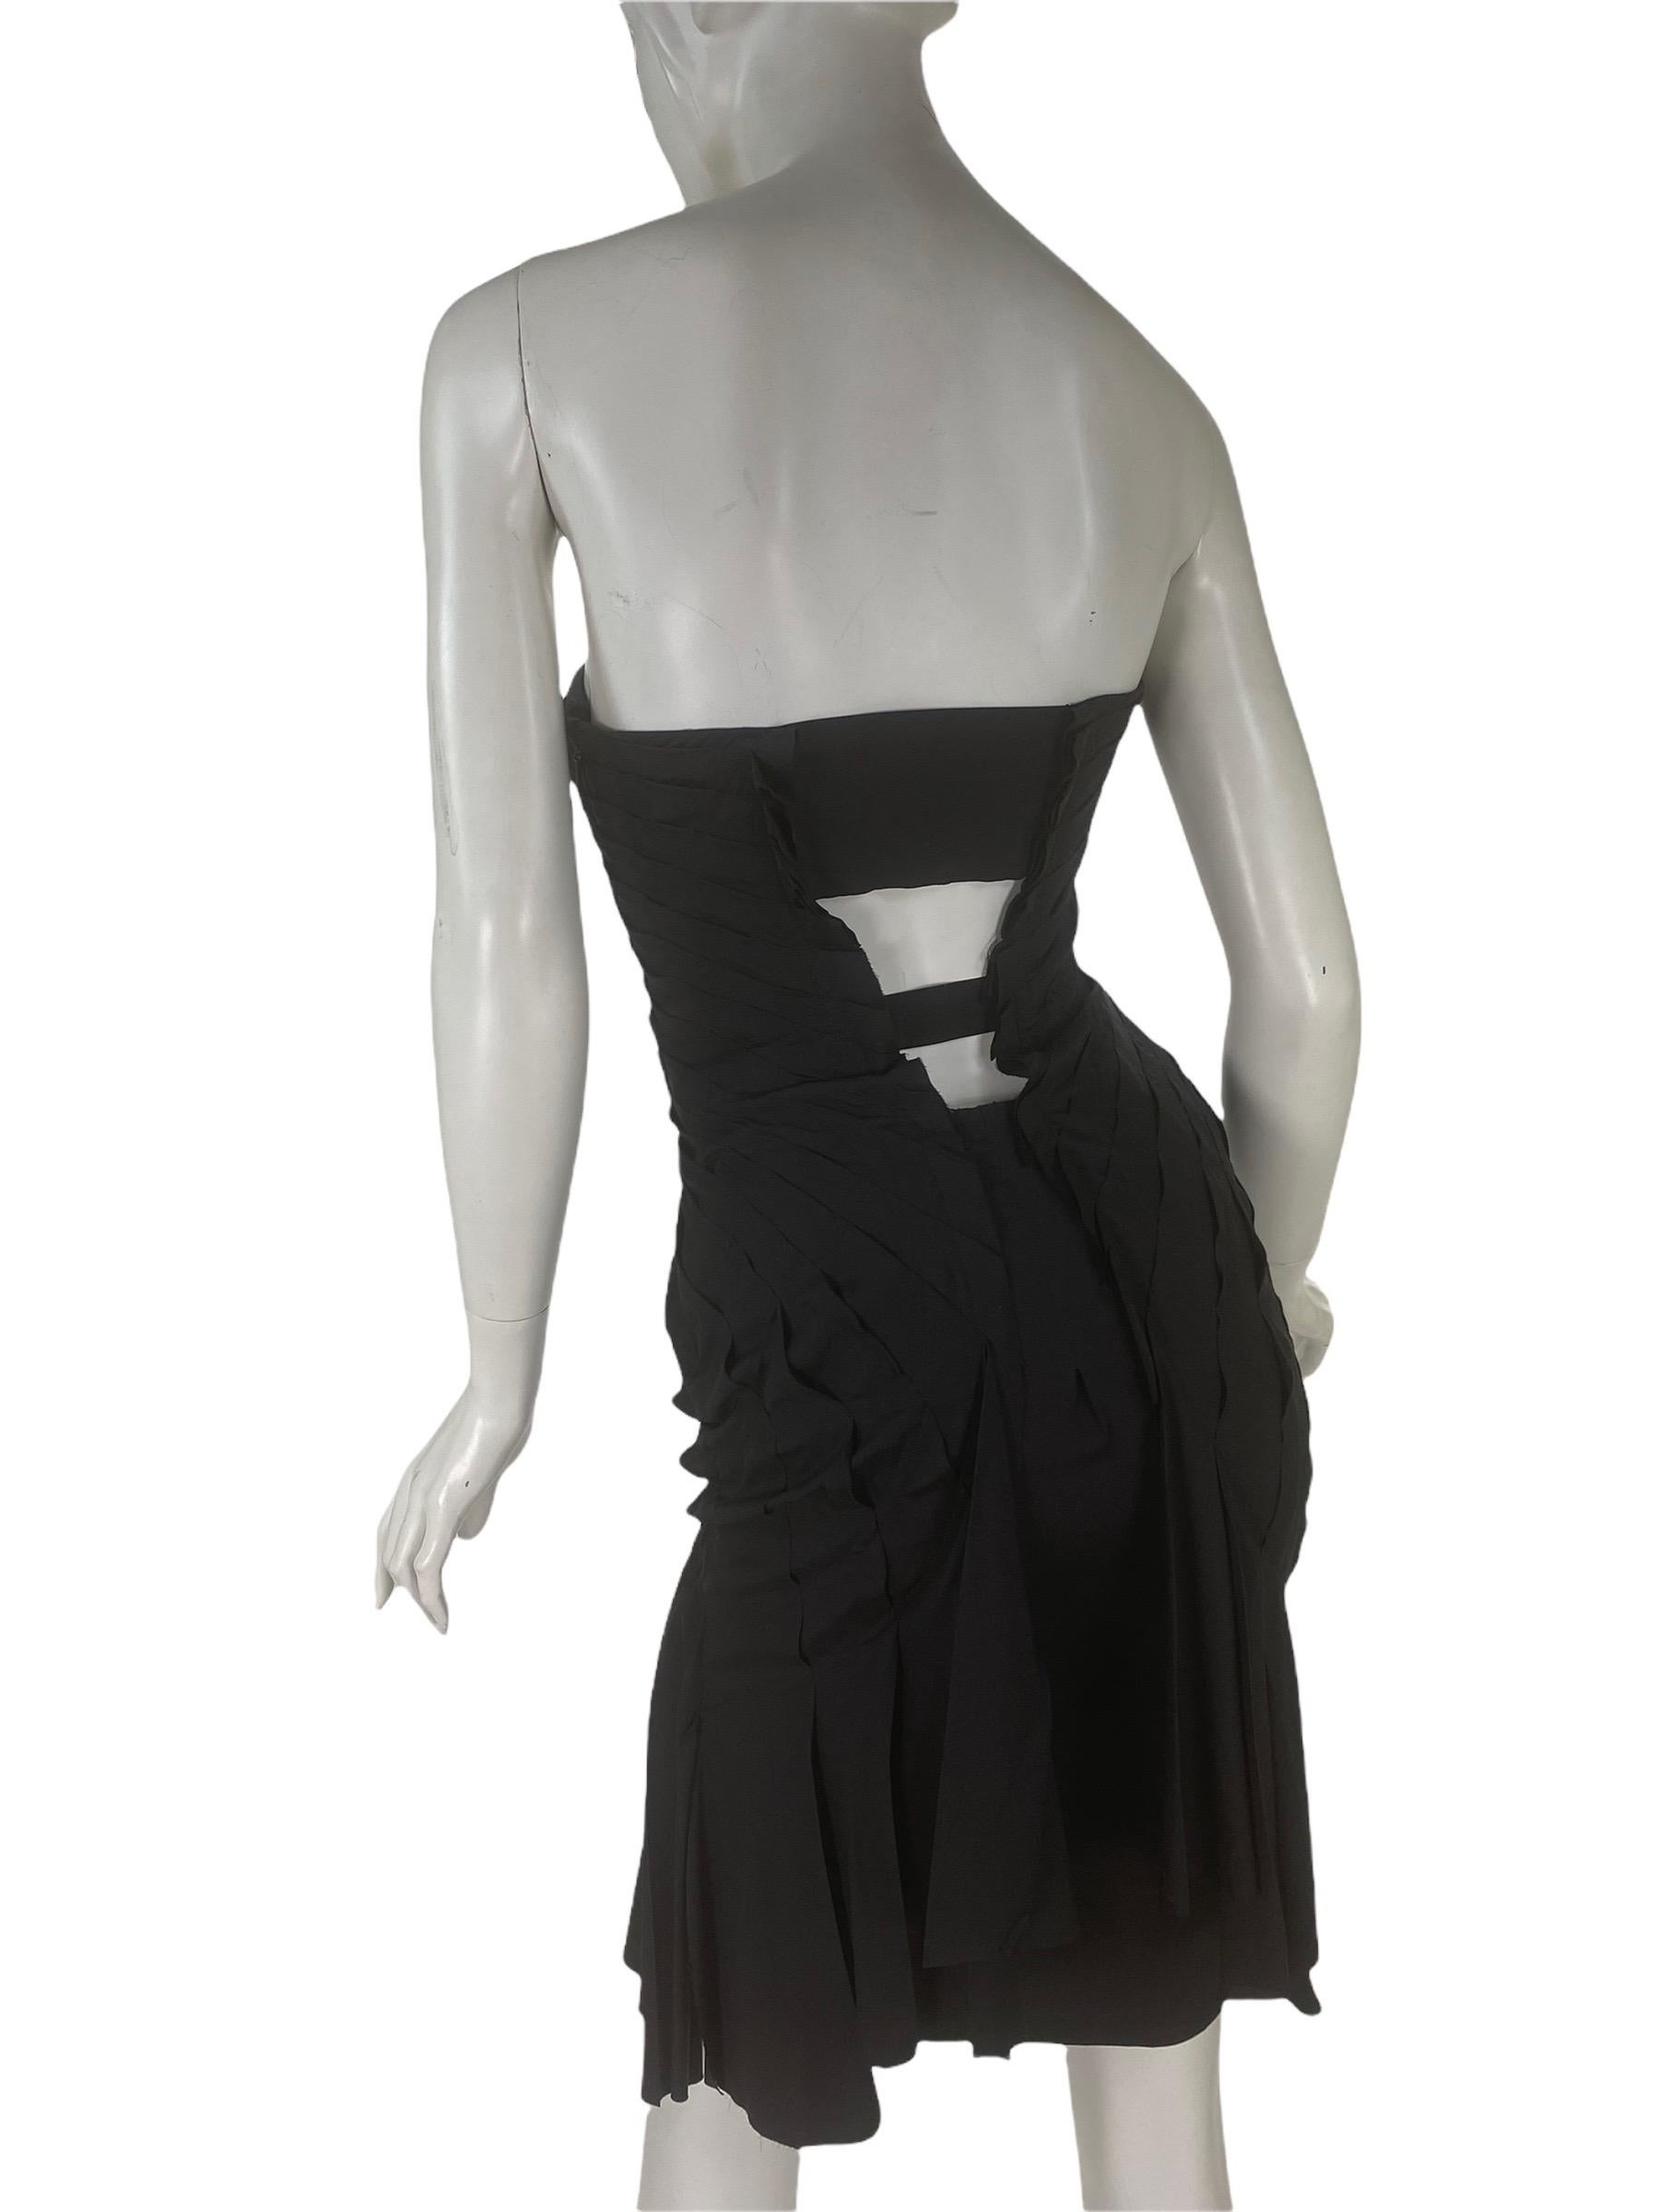 S/S 2004 Vintage Tom Ford for Gucci Strapless Black Silk Dress 40 In Excellent Condition For Sale In Montgomery, TX